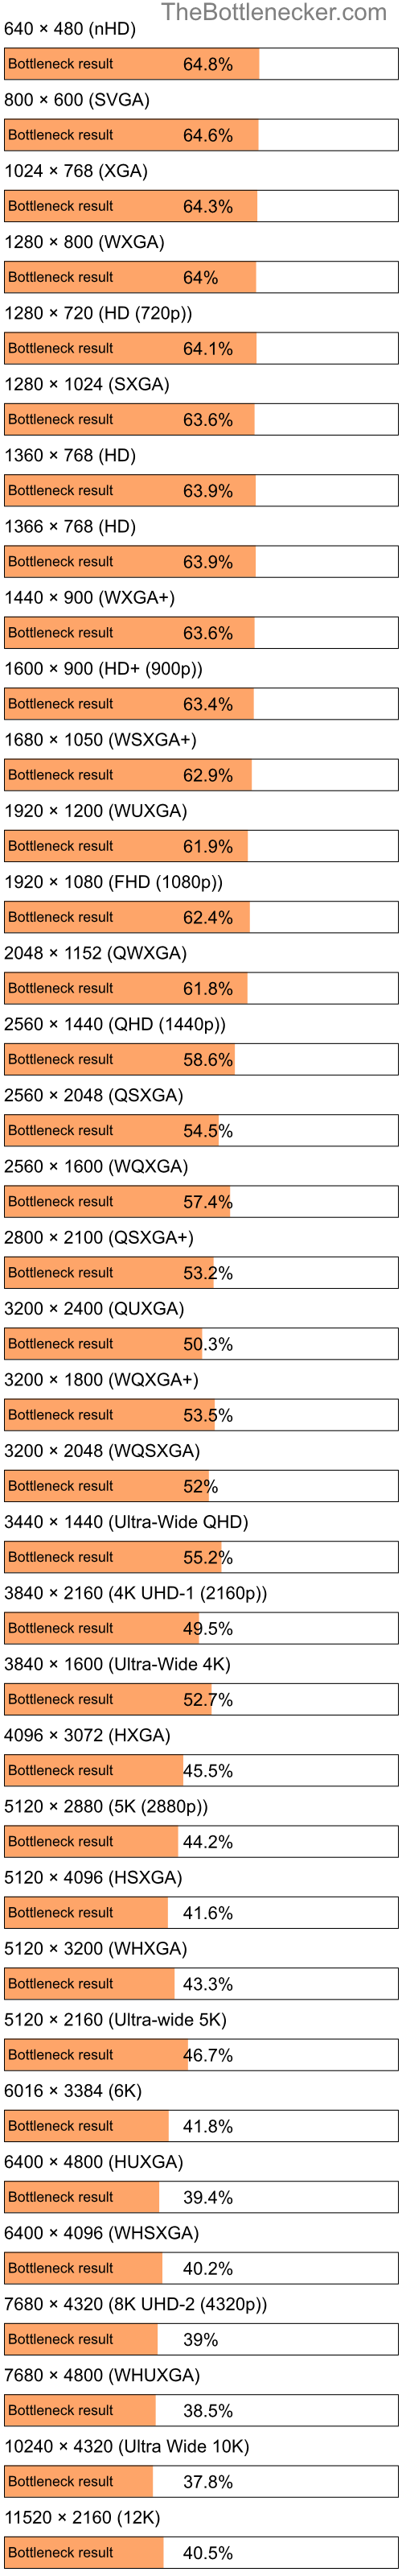 Bottleneck results by resolution for AMD Ryzen 5 2600 and NVIDIA GeForce RTX 4080 SUPER in Processor Intense Tasks